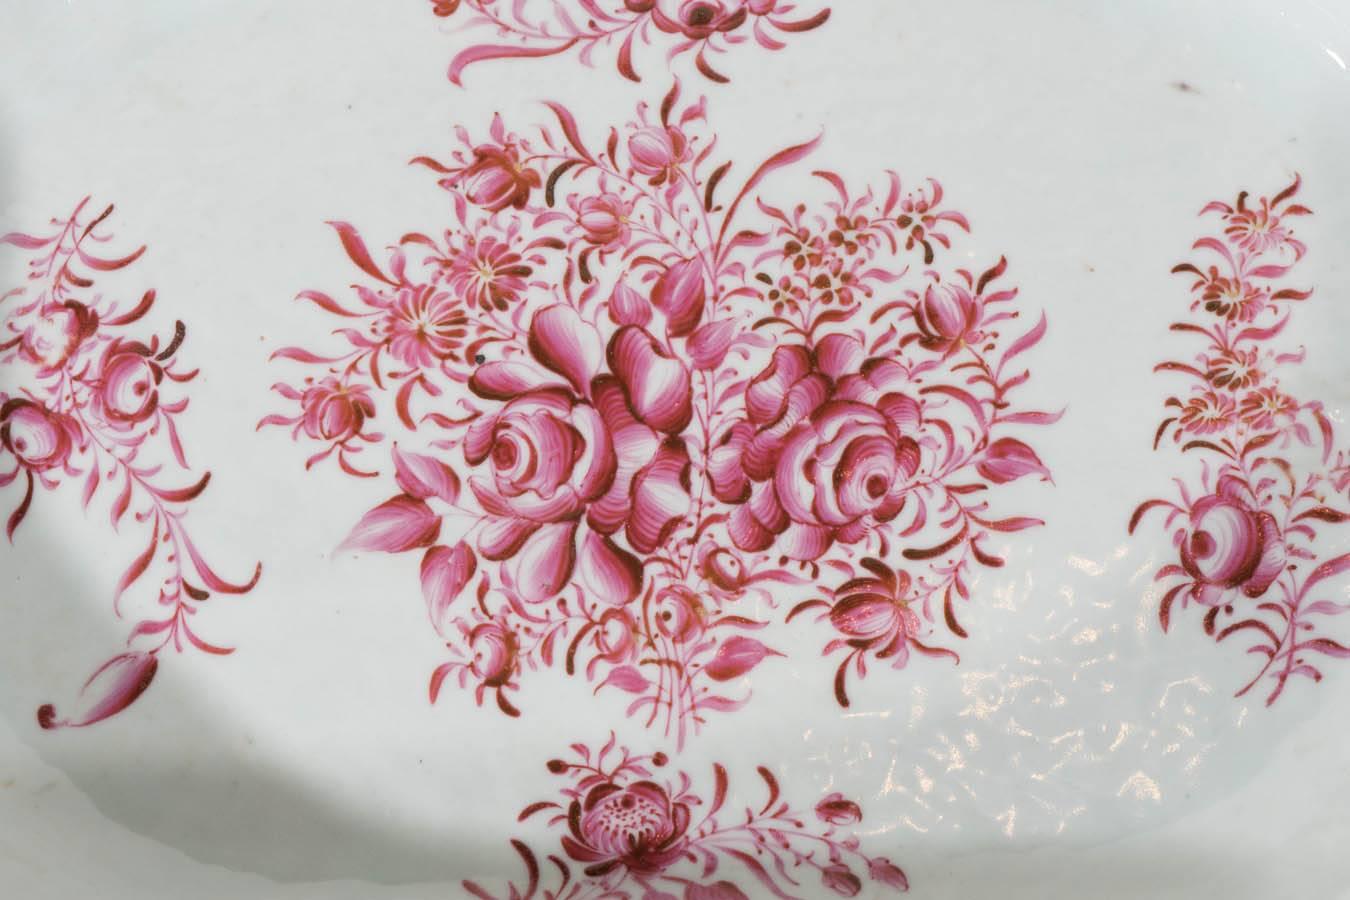  This beautiful pink 18th century Chinese platter is hand-painted with soft rose pink peonies on light gray-blue porcelain. The porcelain has the orange peel texture traditional to many 18th century Chinese porcelains. Along the edges the rose pink